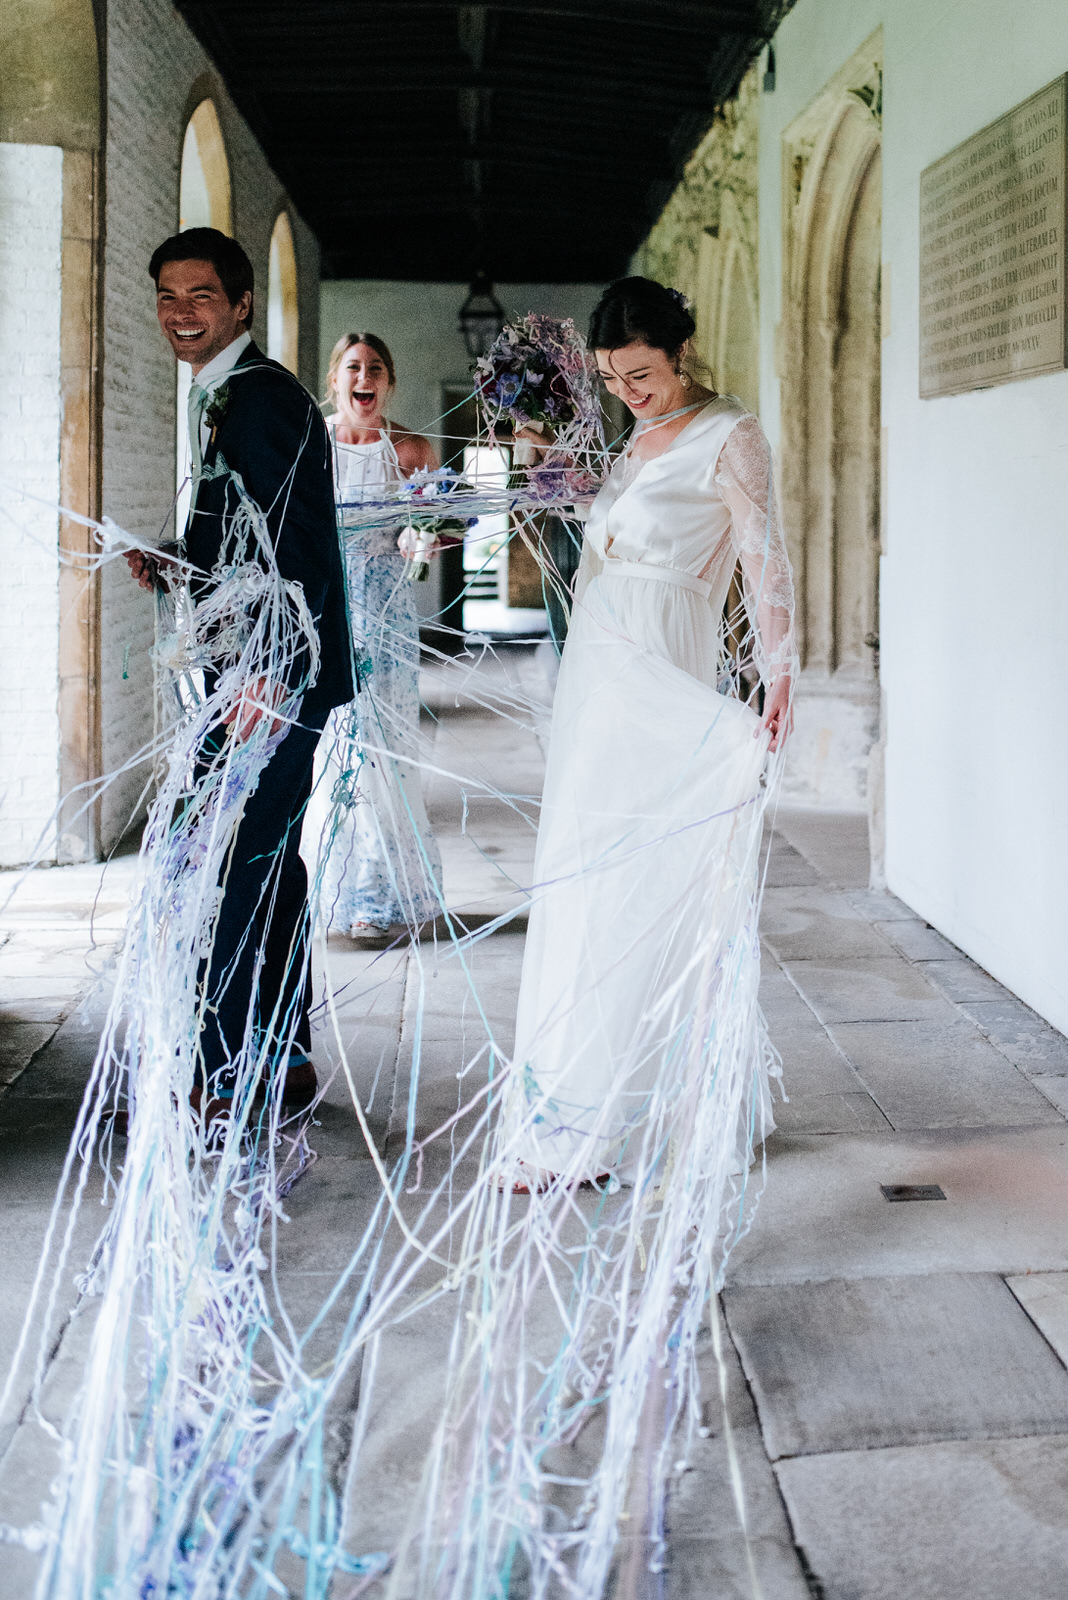 Bride and groom completely covered in strings of confetti as the